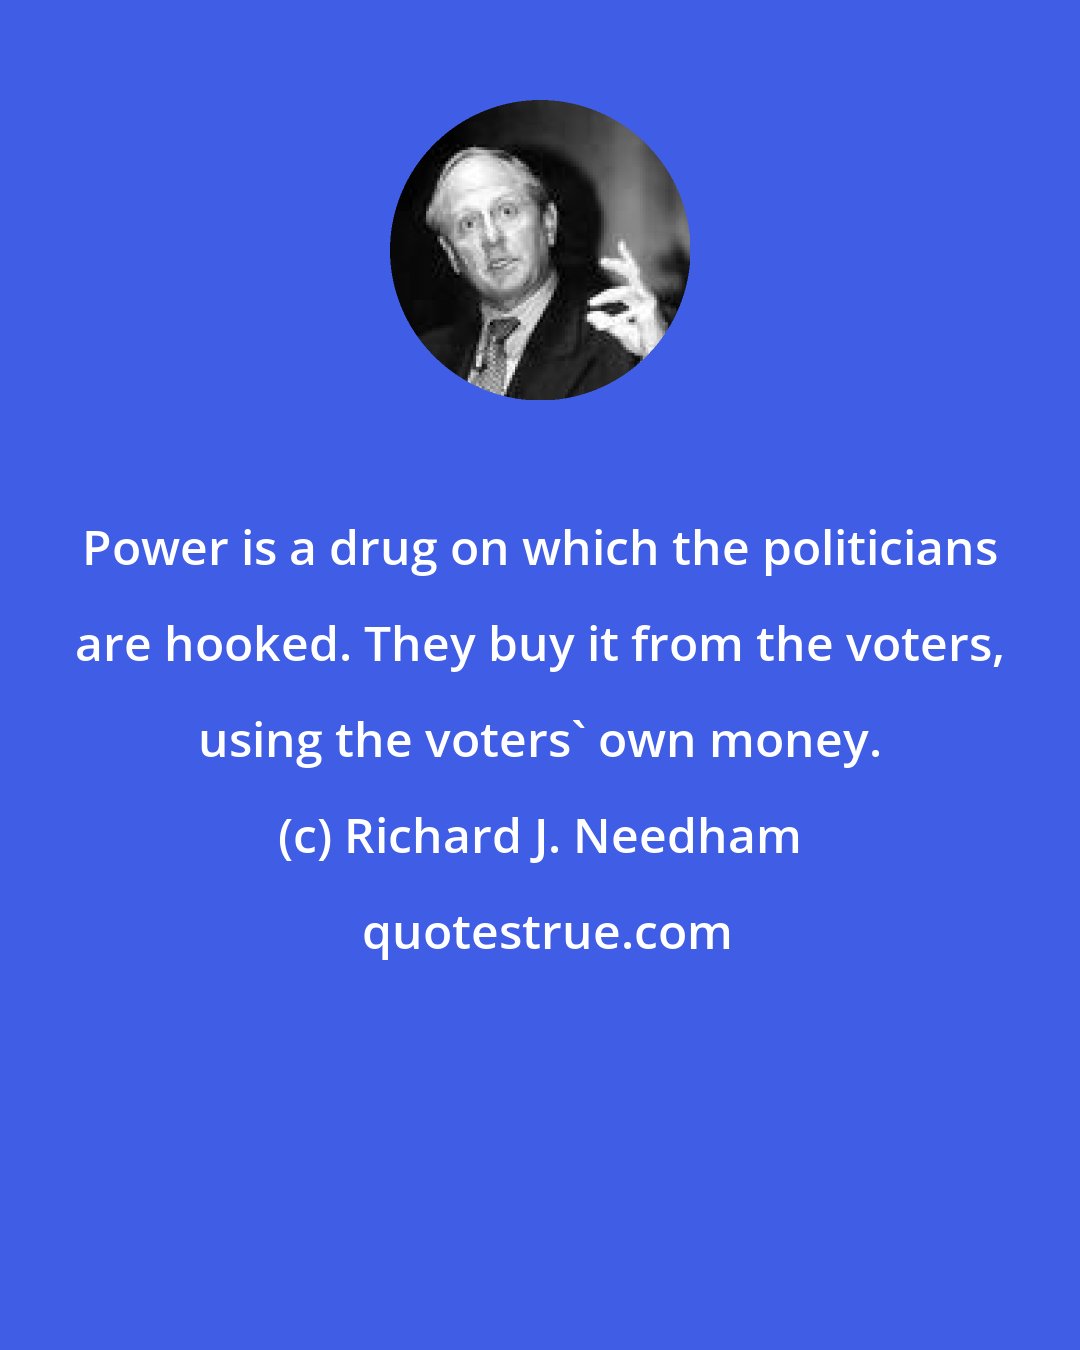 Richard J. Needham: Power is a drug on which the politicians are hooked. They buy it from the voters, using the voters' own money.